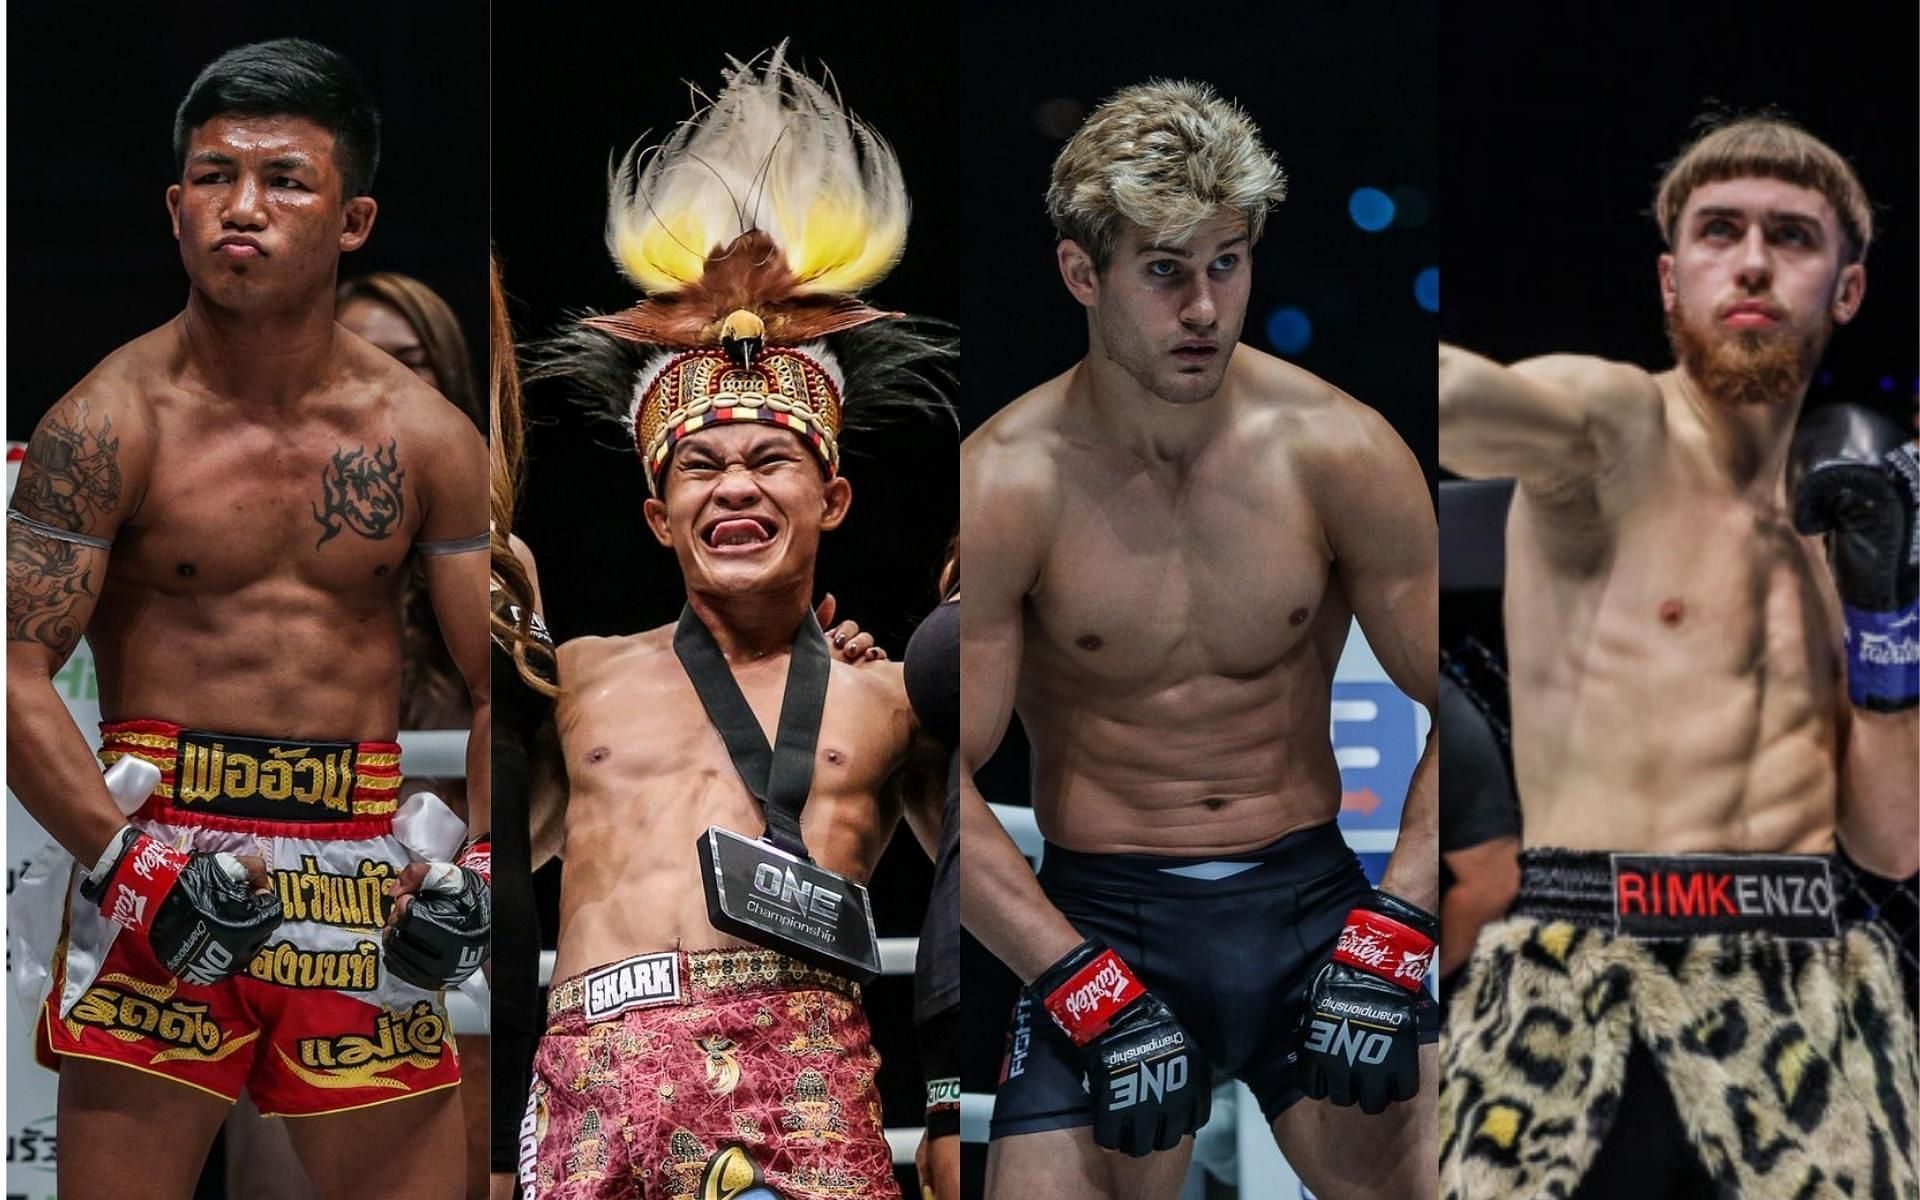 (From left to right) Rodtang Jitmuangnon, Adrian Mattheis, Sage Northcutt, and Dovydas Rimkus are some of the weirdest fighters in ONE Championship. (Images courtesy of ONE Championship)